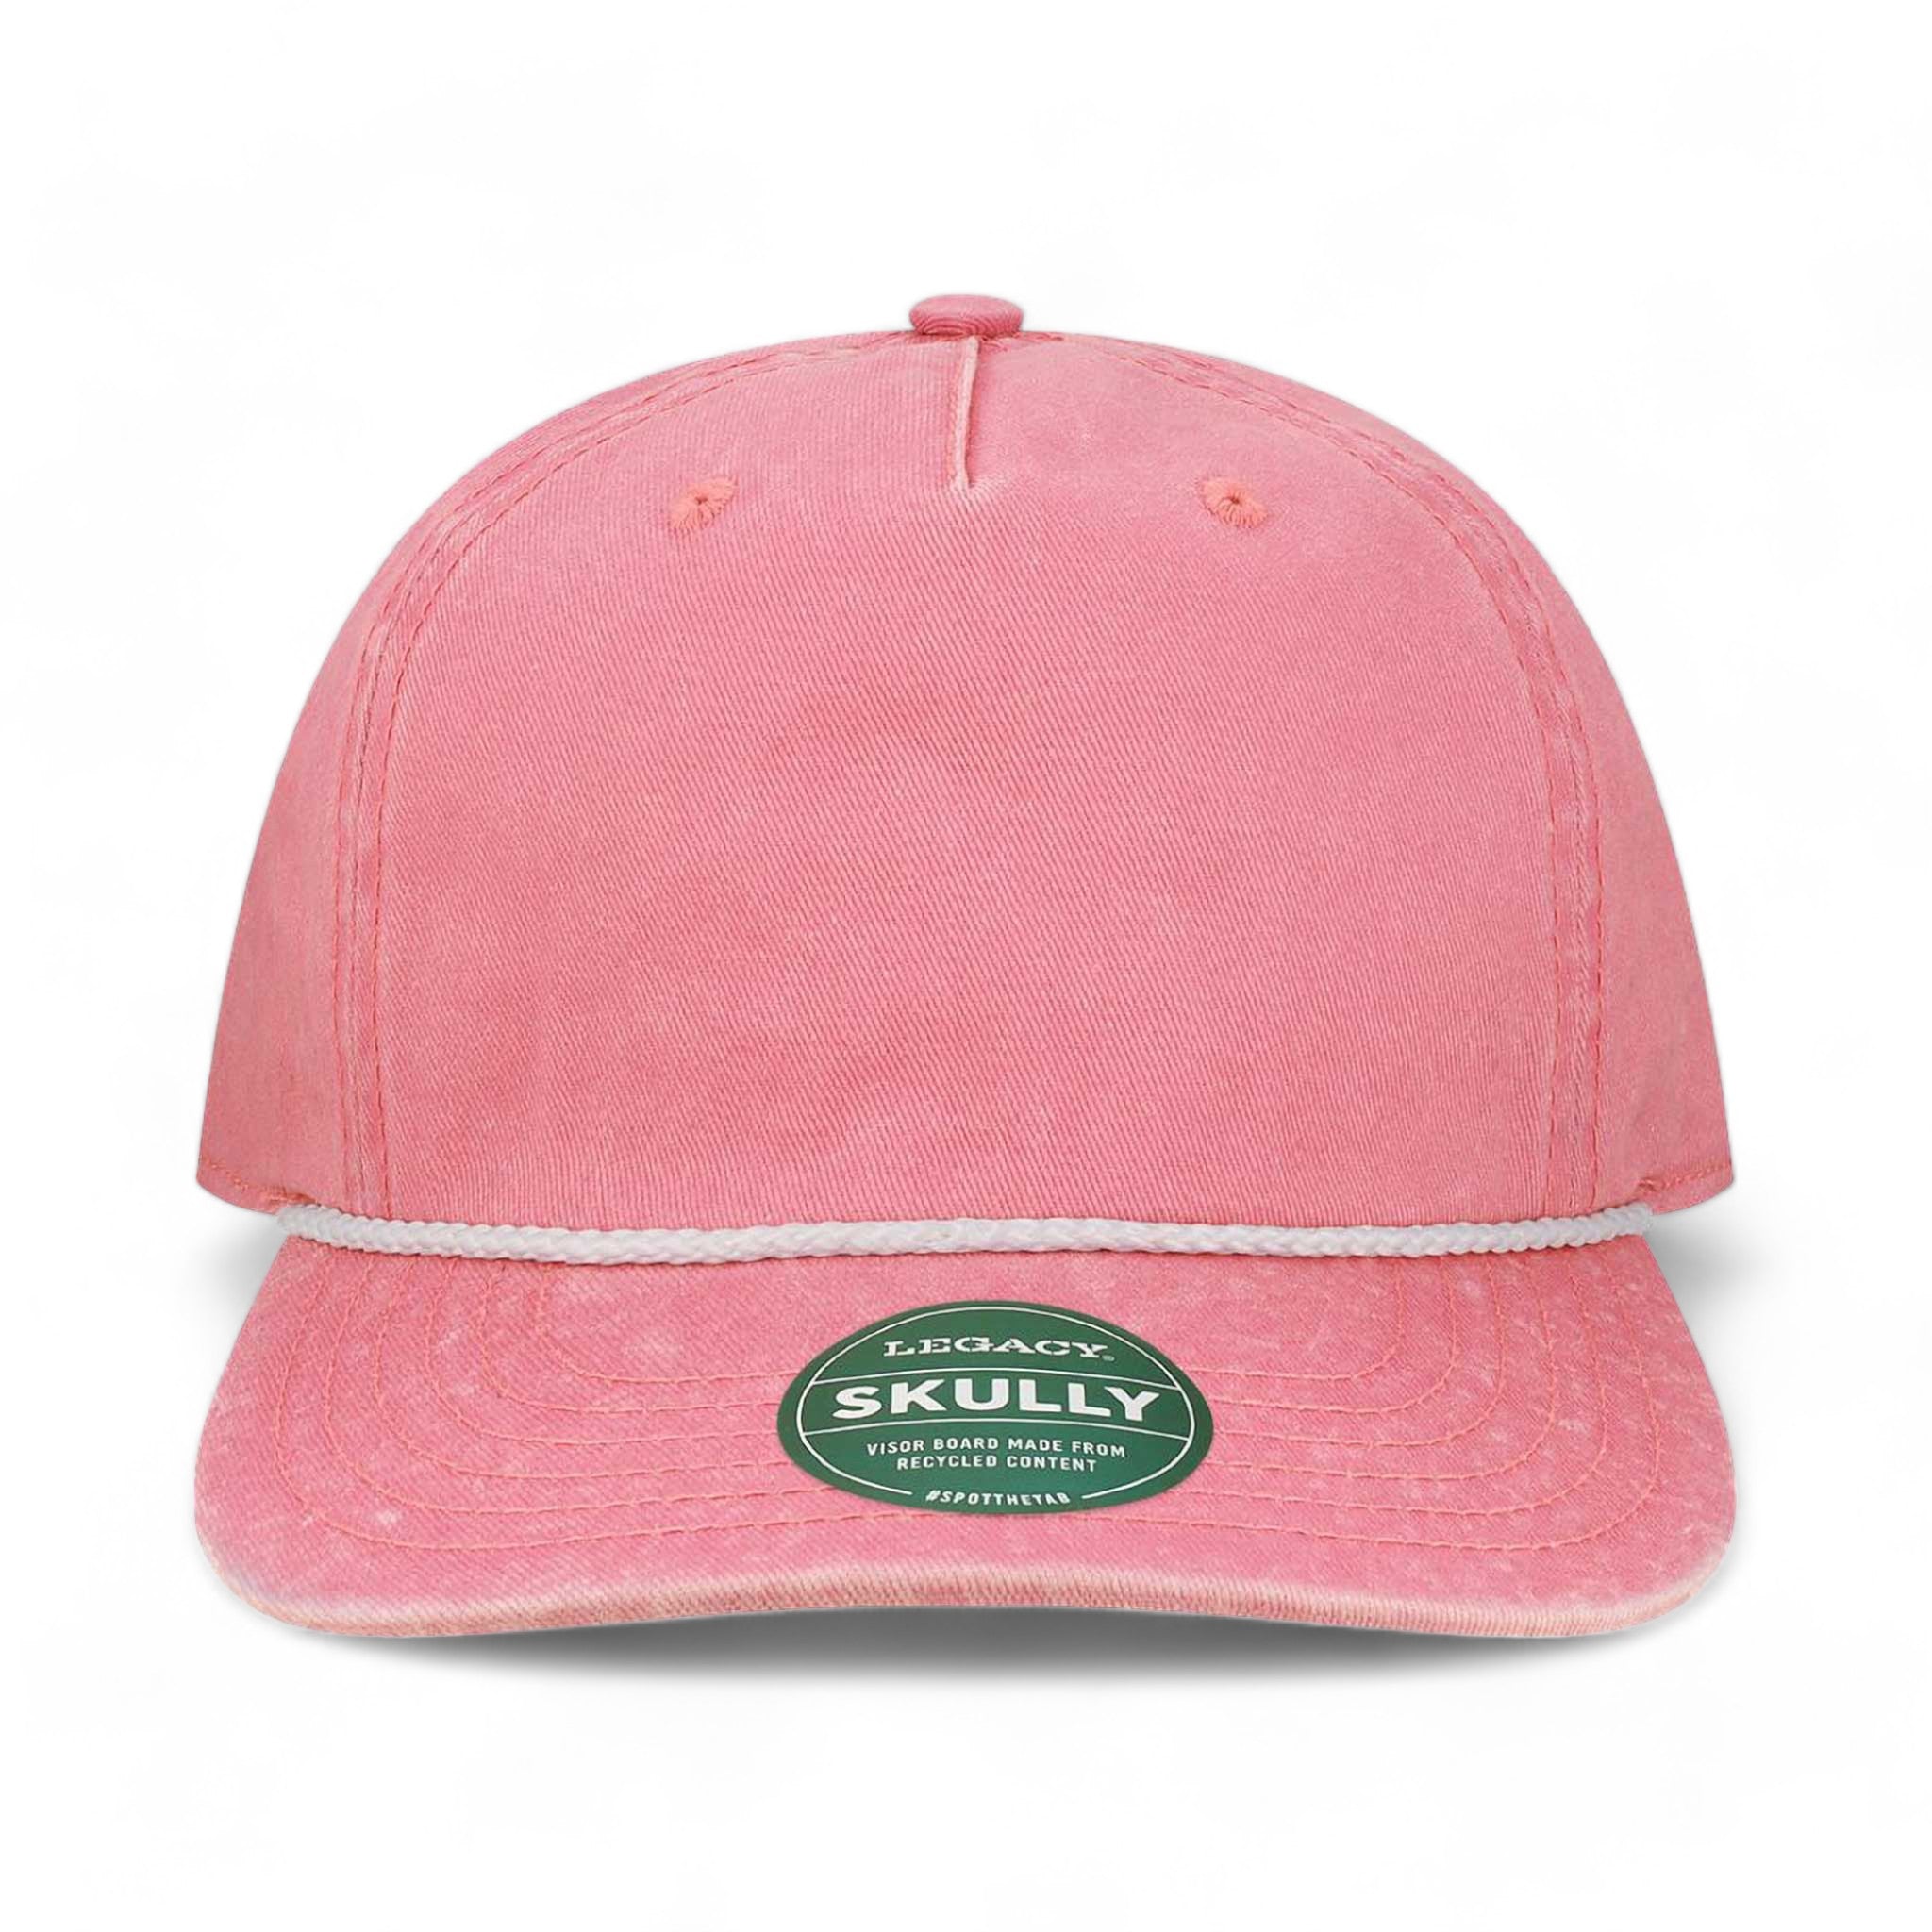 Front view of LEGACY SKULLY custom hat in pink